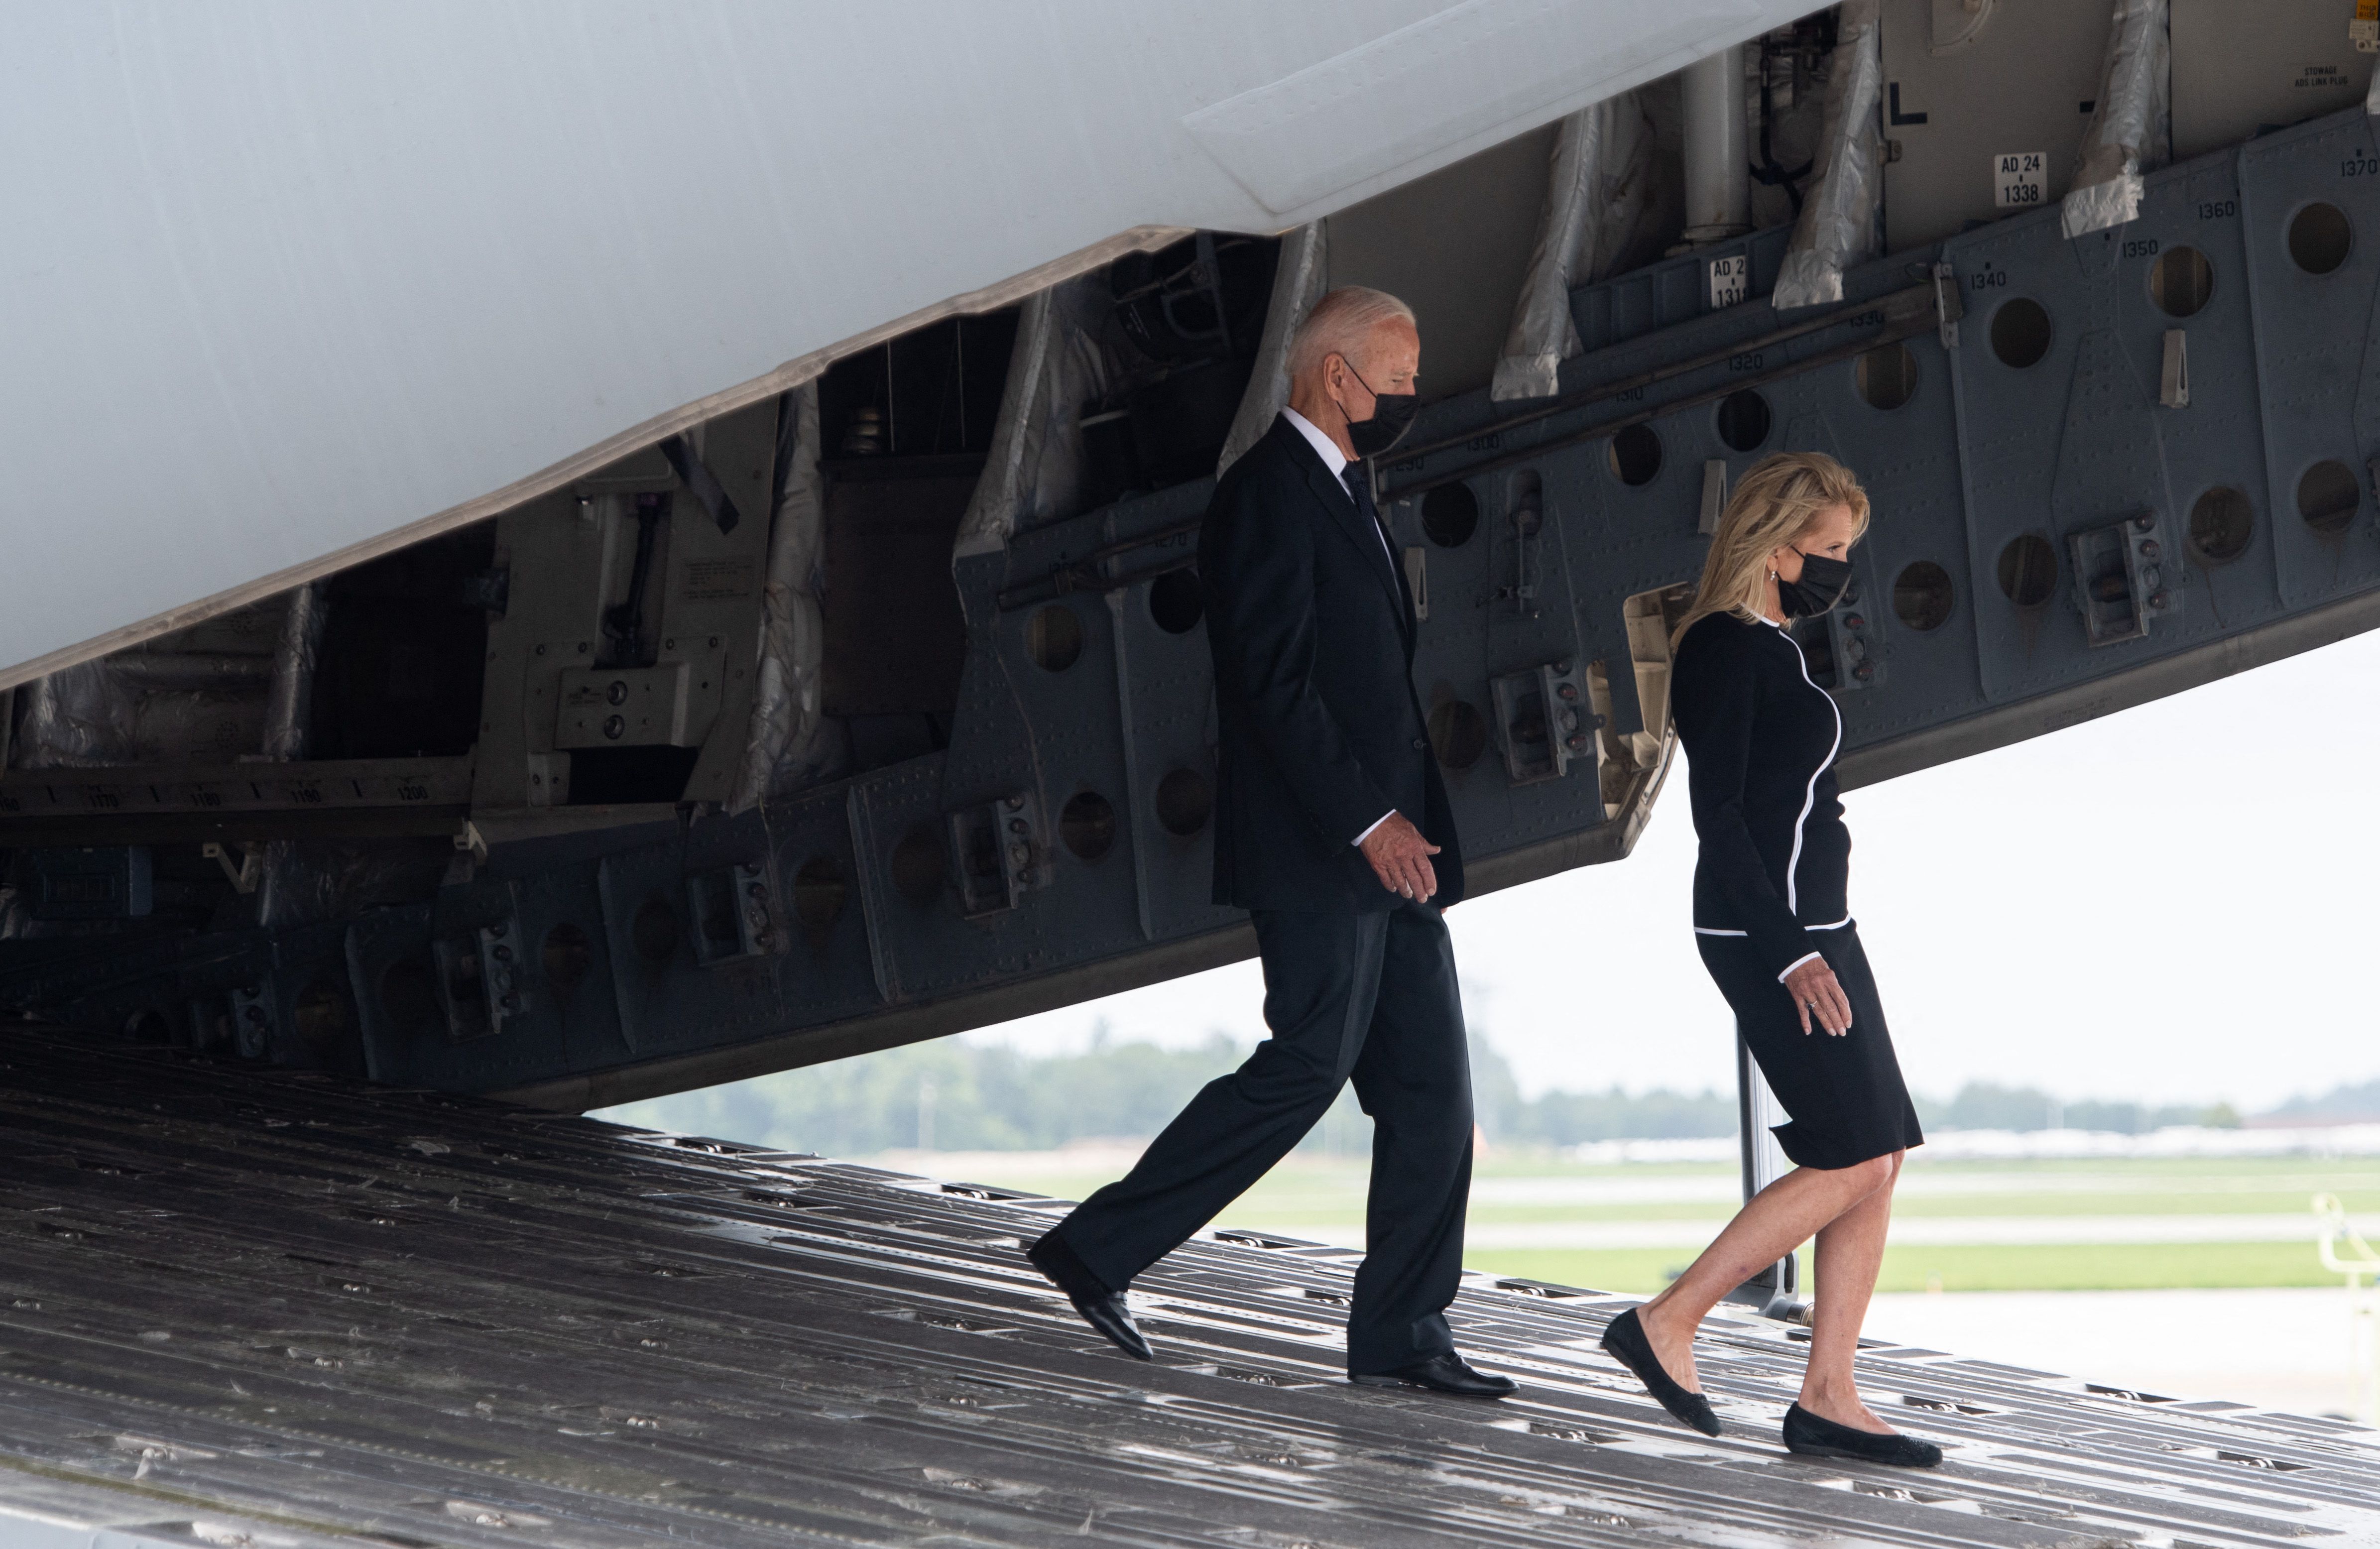 President Biden and first lady Jill Biden are seen leaving an Air Force transport plane after leading a prayer for the 13 service members killed in Kabul last week.